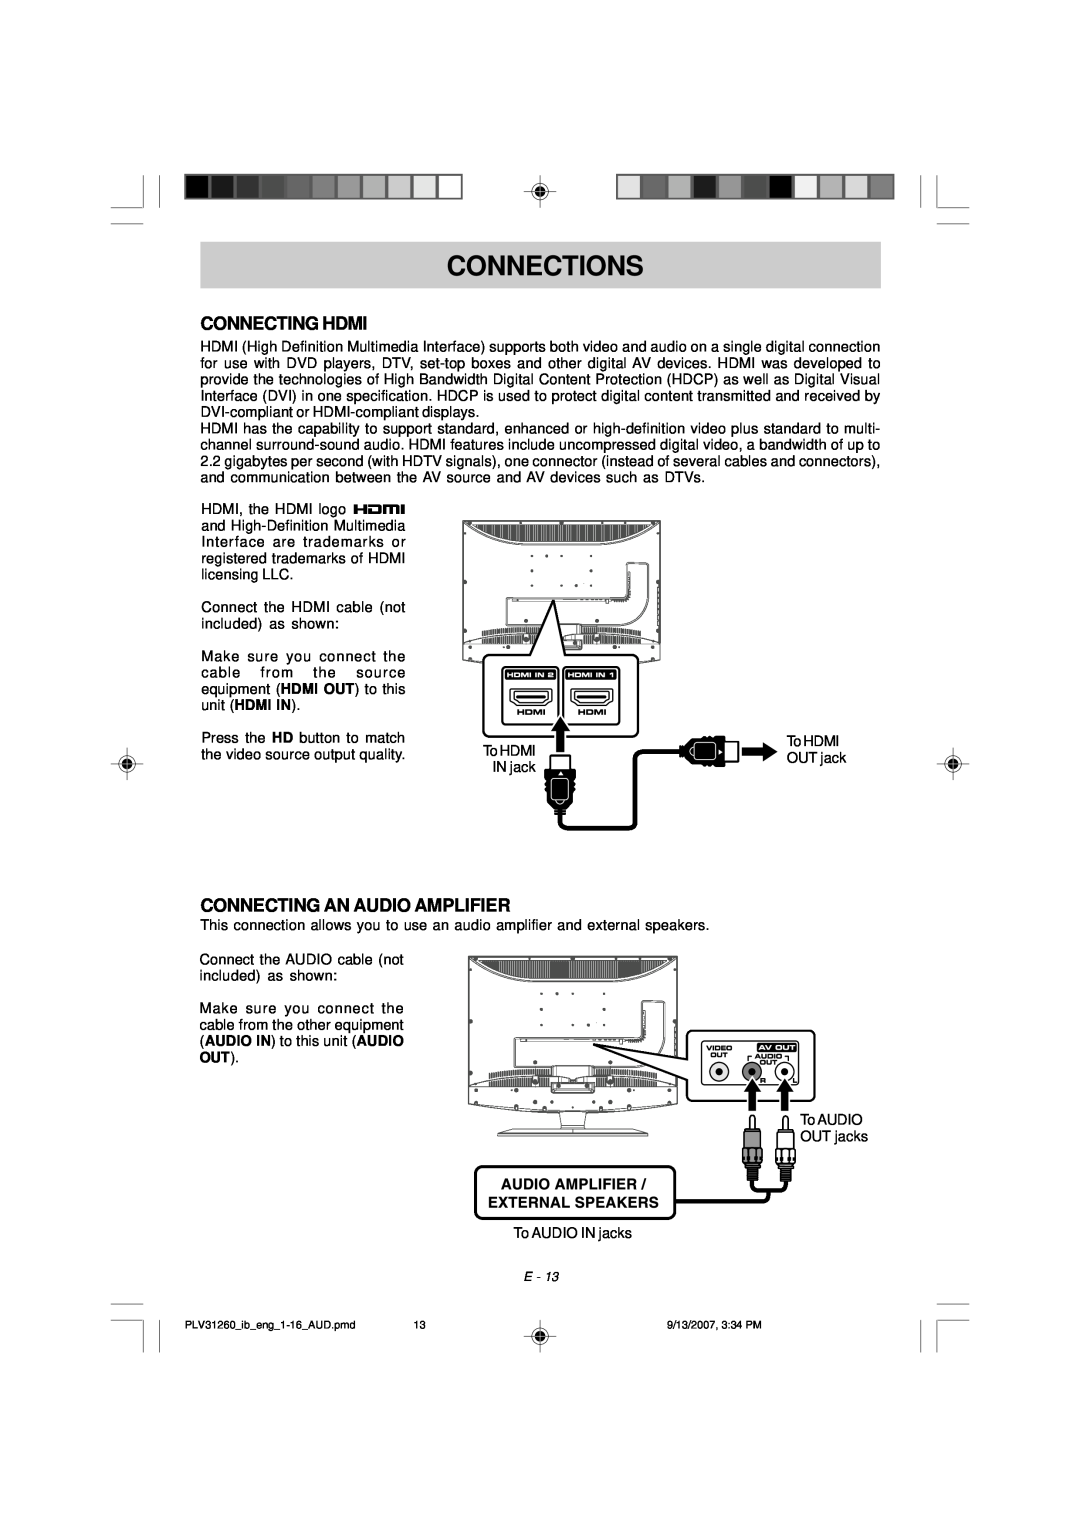 Audiovox FPE2607DV owner manual Connecting Hdmi, Connecting An Audio Amplifier, Connections 